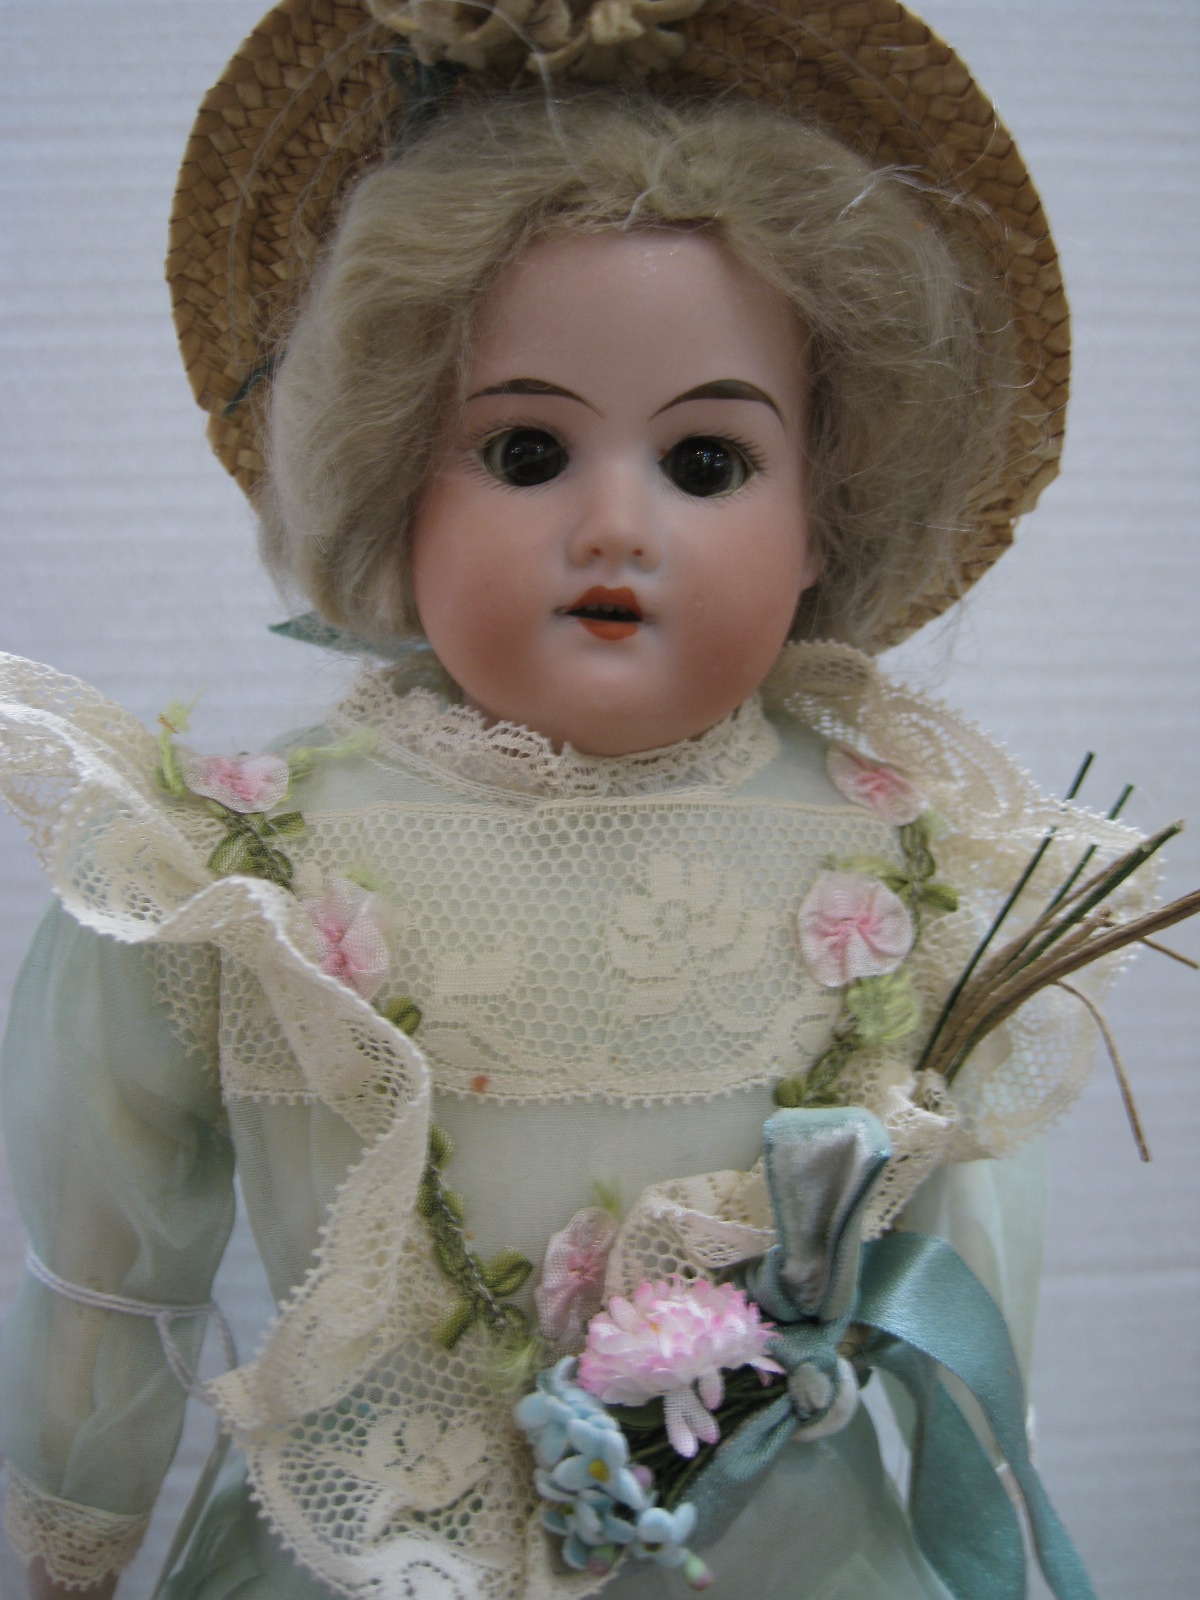 Antiques, Art, and Collectibles: Antique dolls